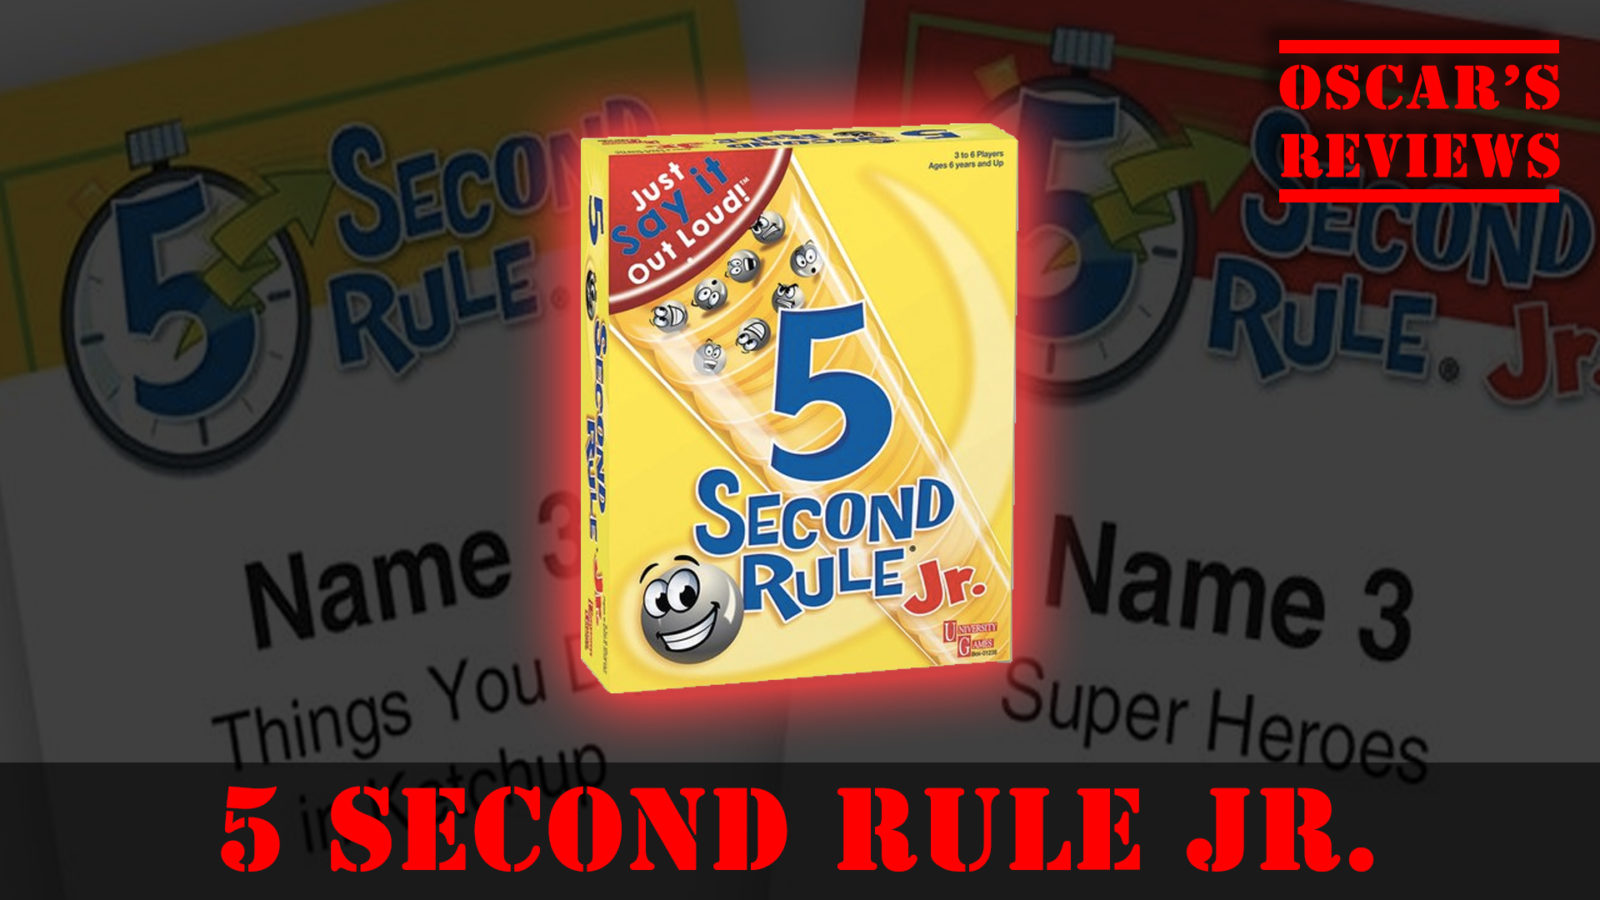 Name 3 Things You Want for Christmas. Fun with 5 Second Rule Jr. from University Games